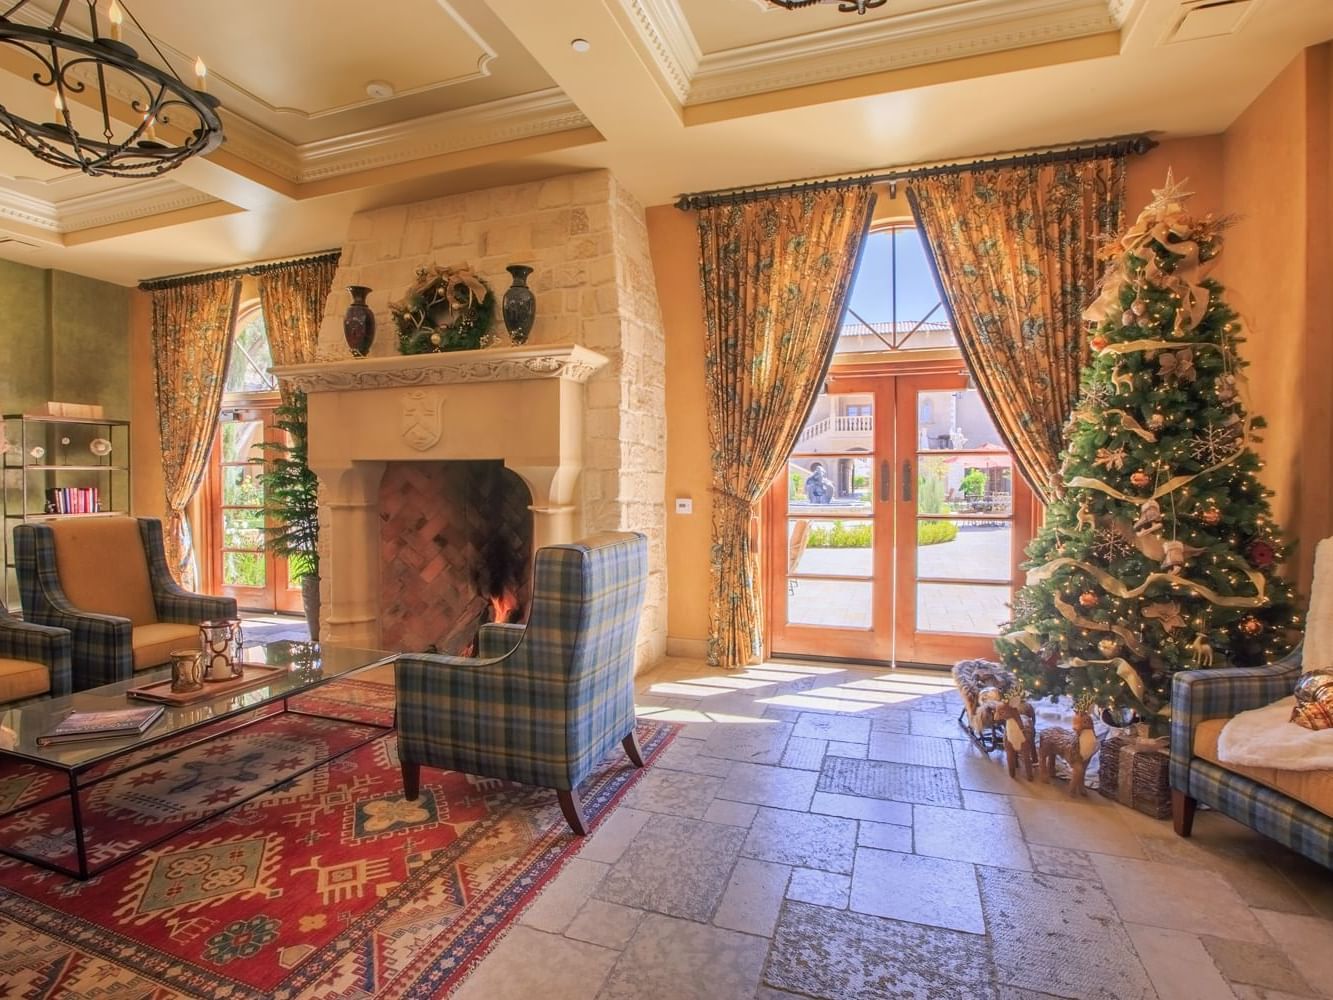 Sequoia room decorated with Christmas tree